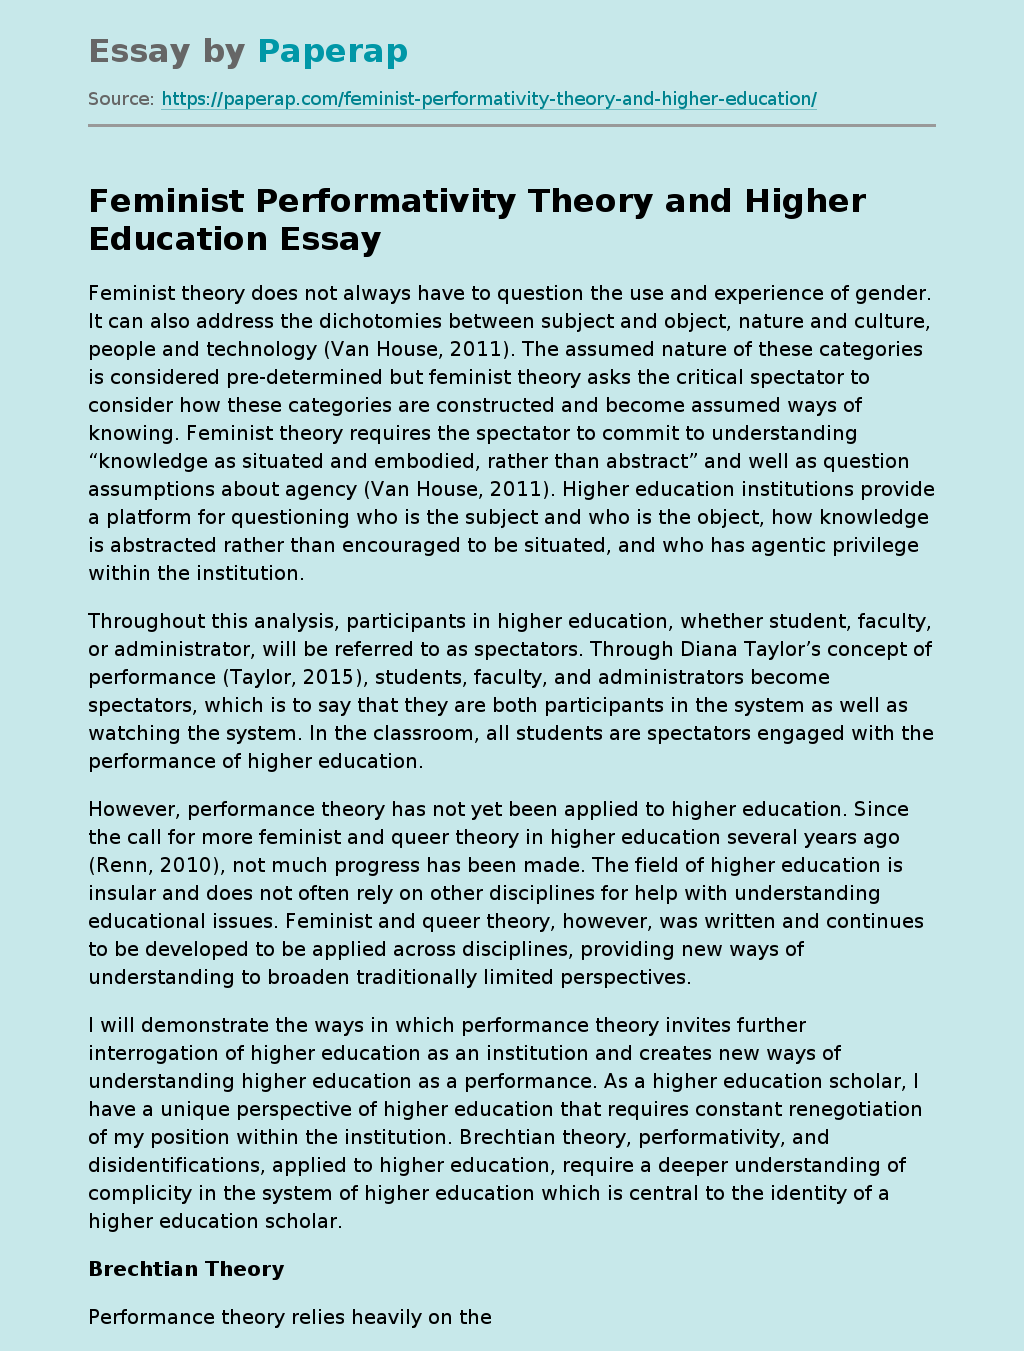 Feminist Performativity Theory and Higher Education